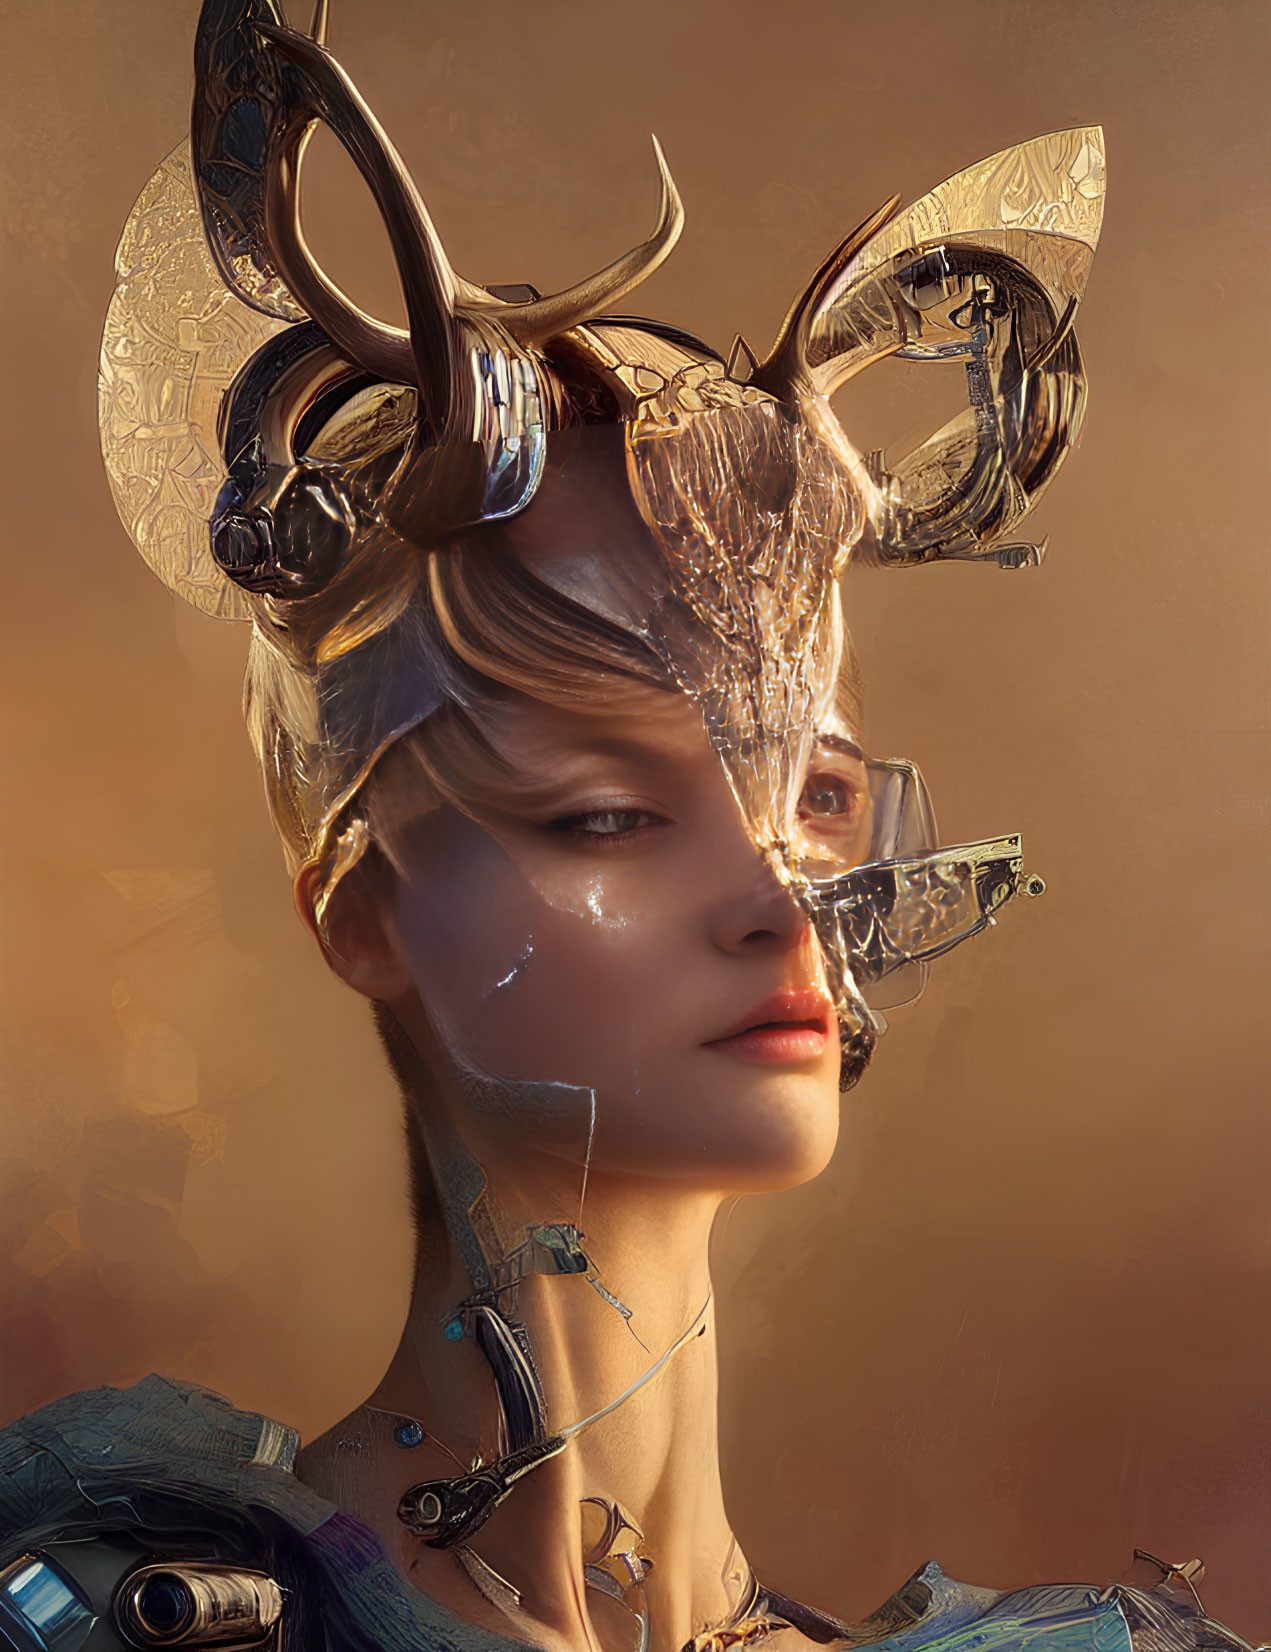 Digital art portrait of woman with cybernetic enhancements and metallic horns on warm-toned backdrop